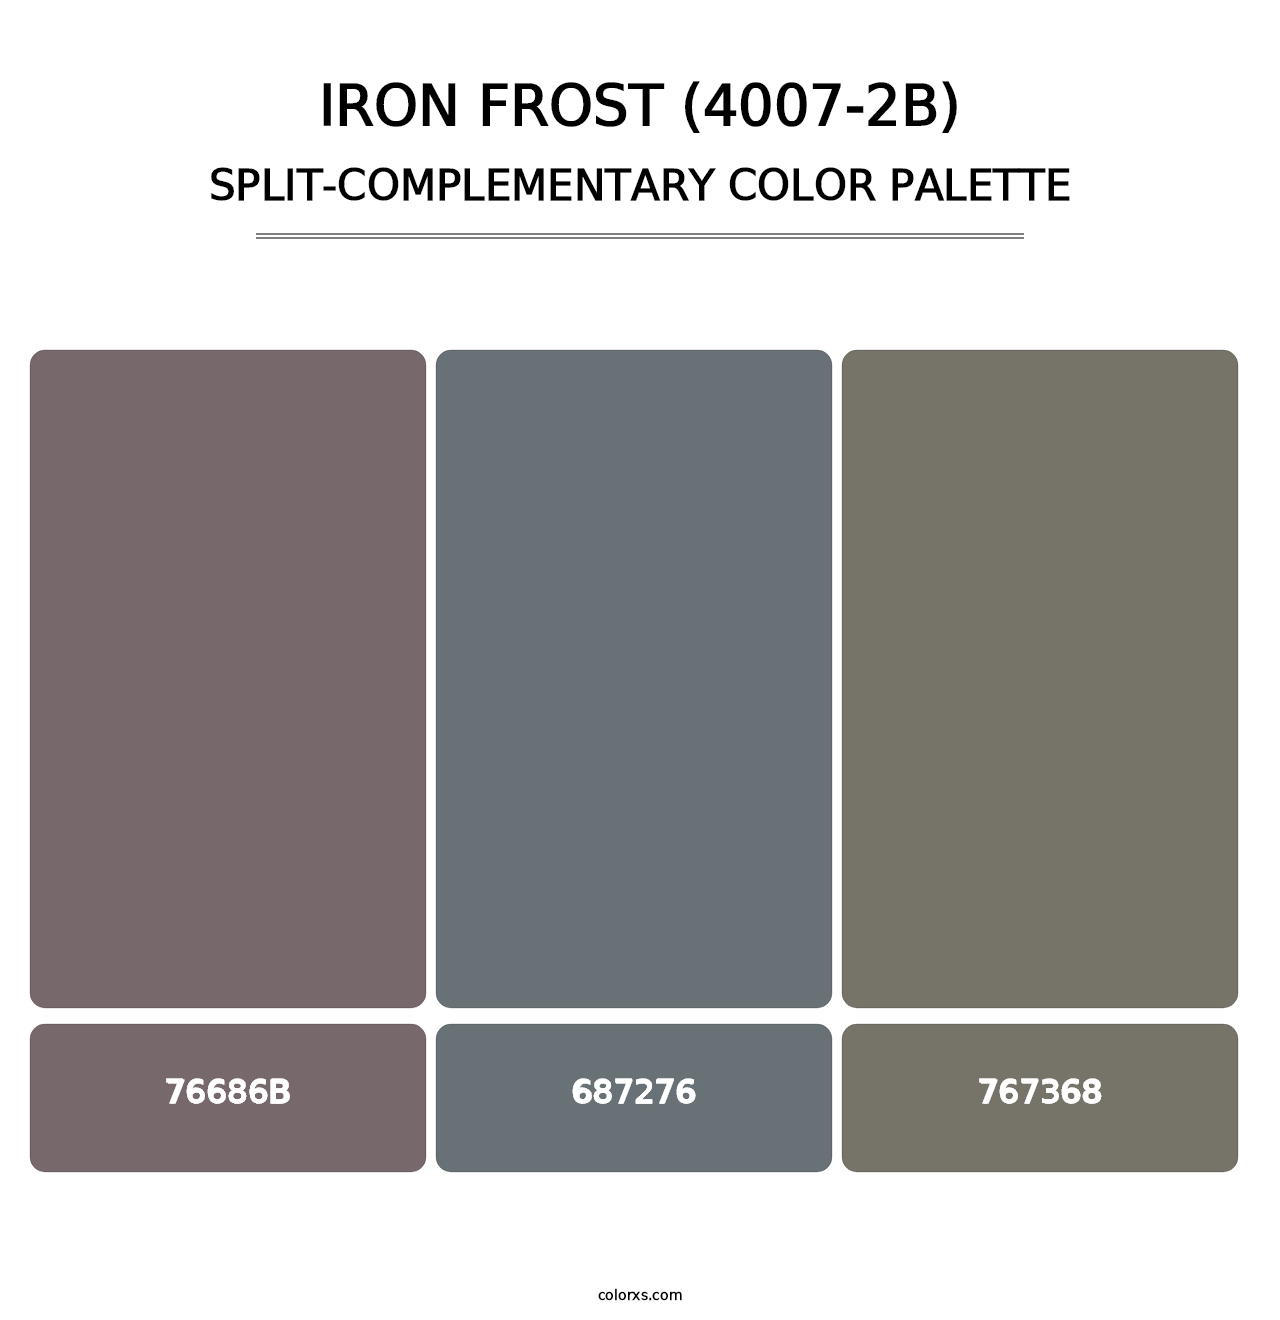 Iron Frost (4007-2B) - Split-Complementary Color Palette